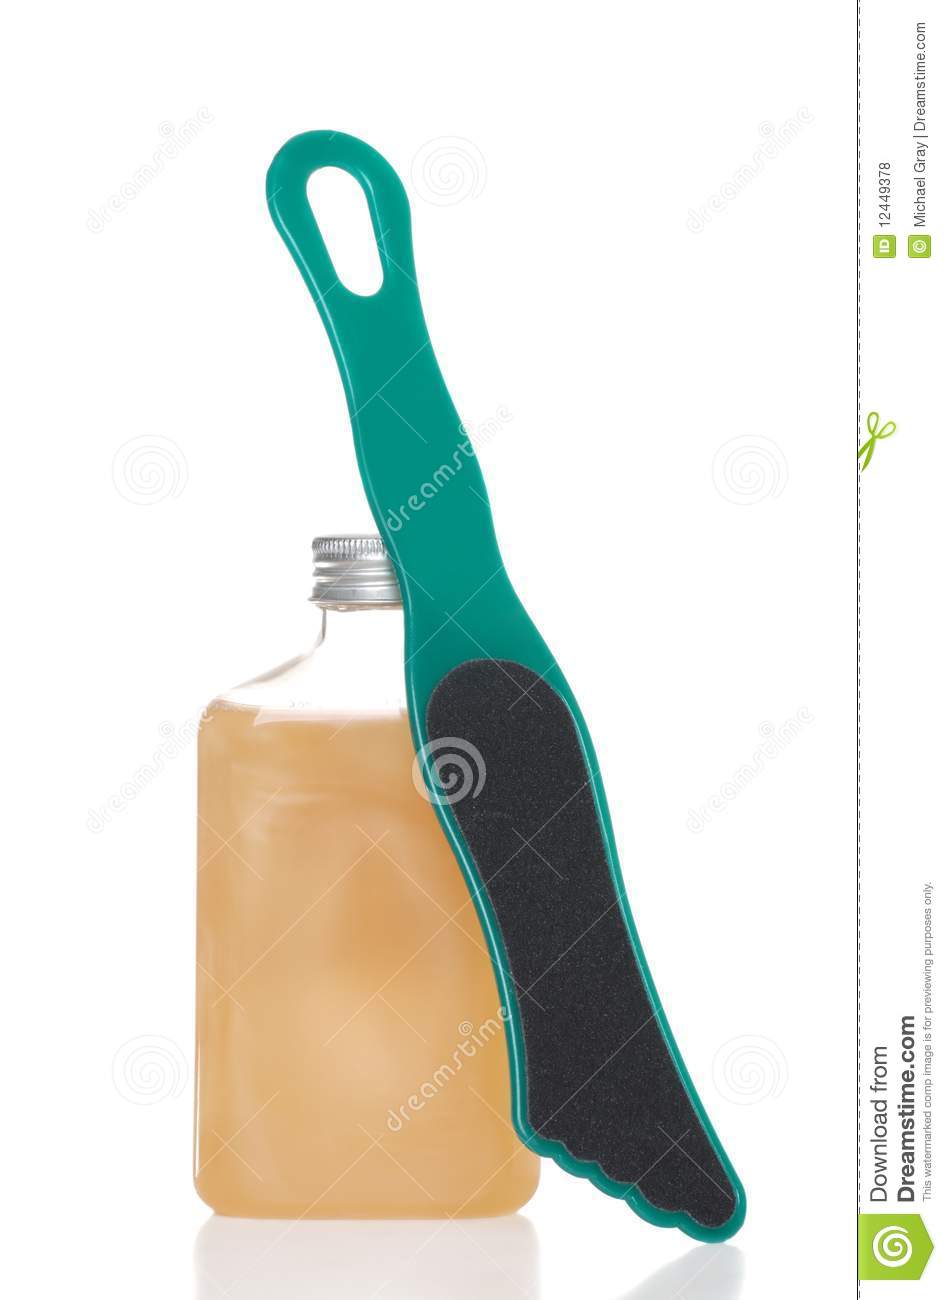 Bottle Of Bubble Bath With Callus File Royalty Free Stock Photos